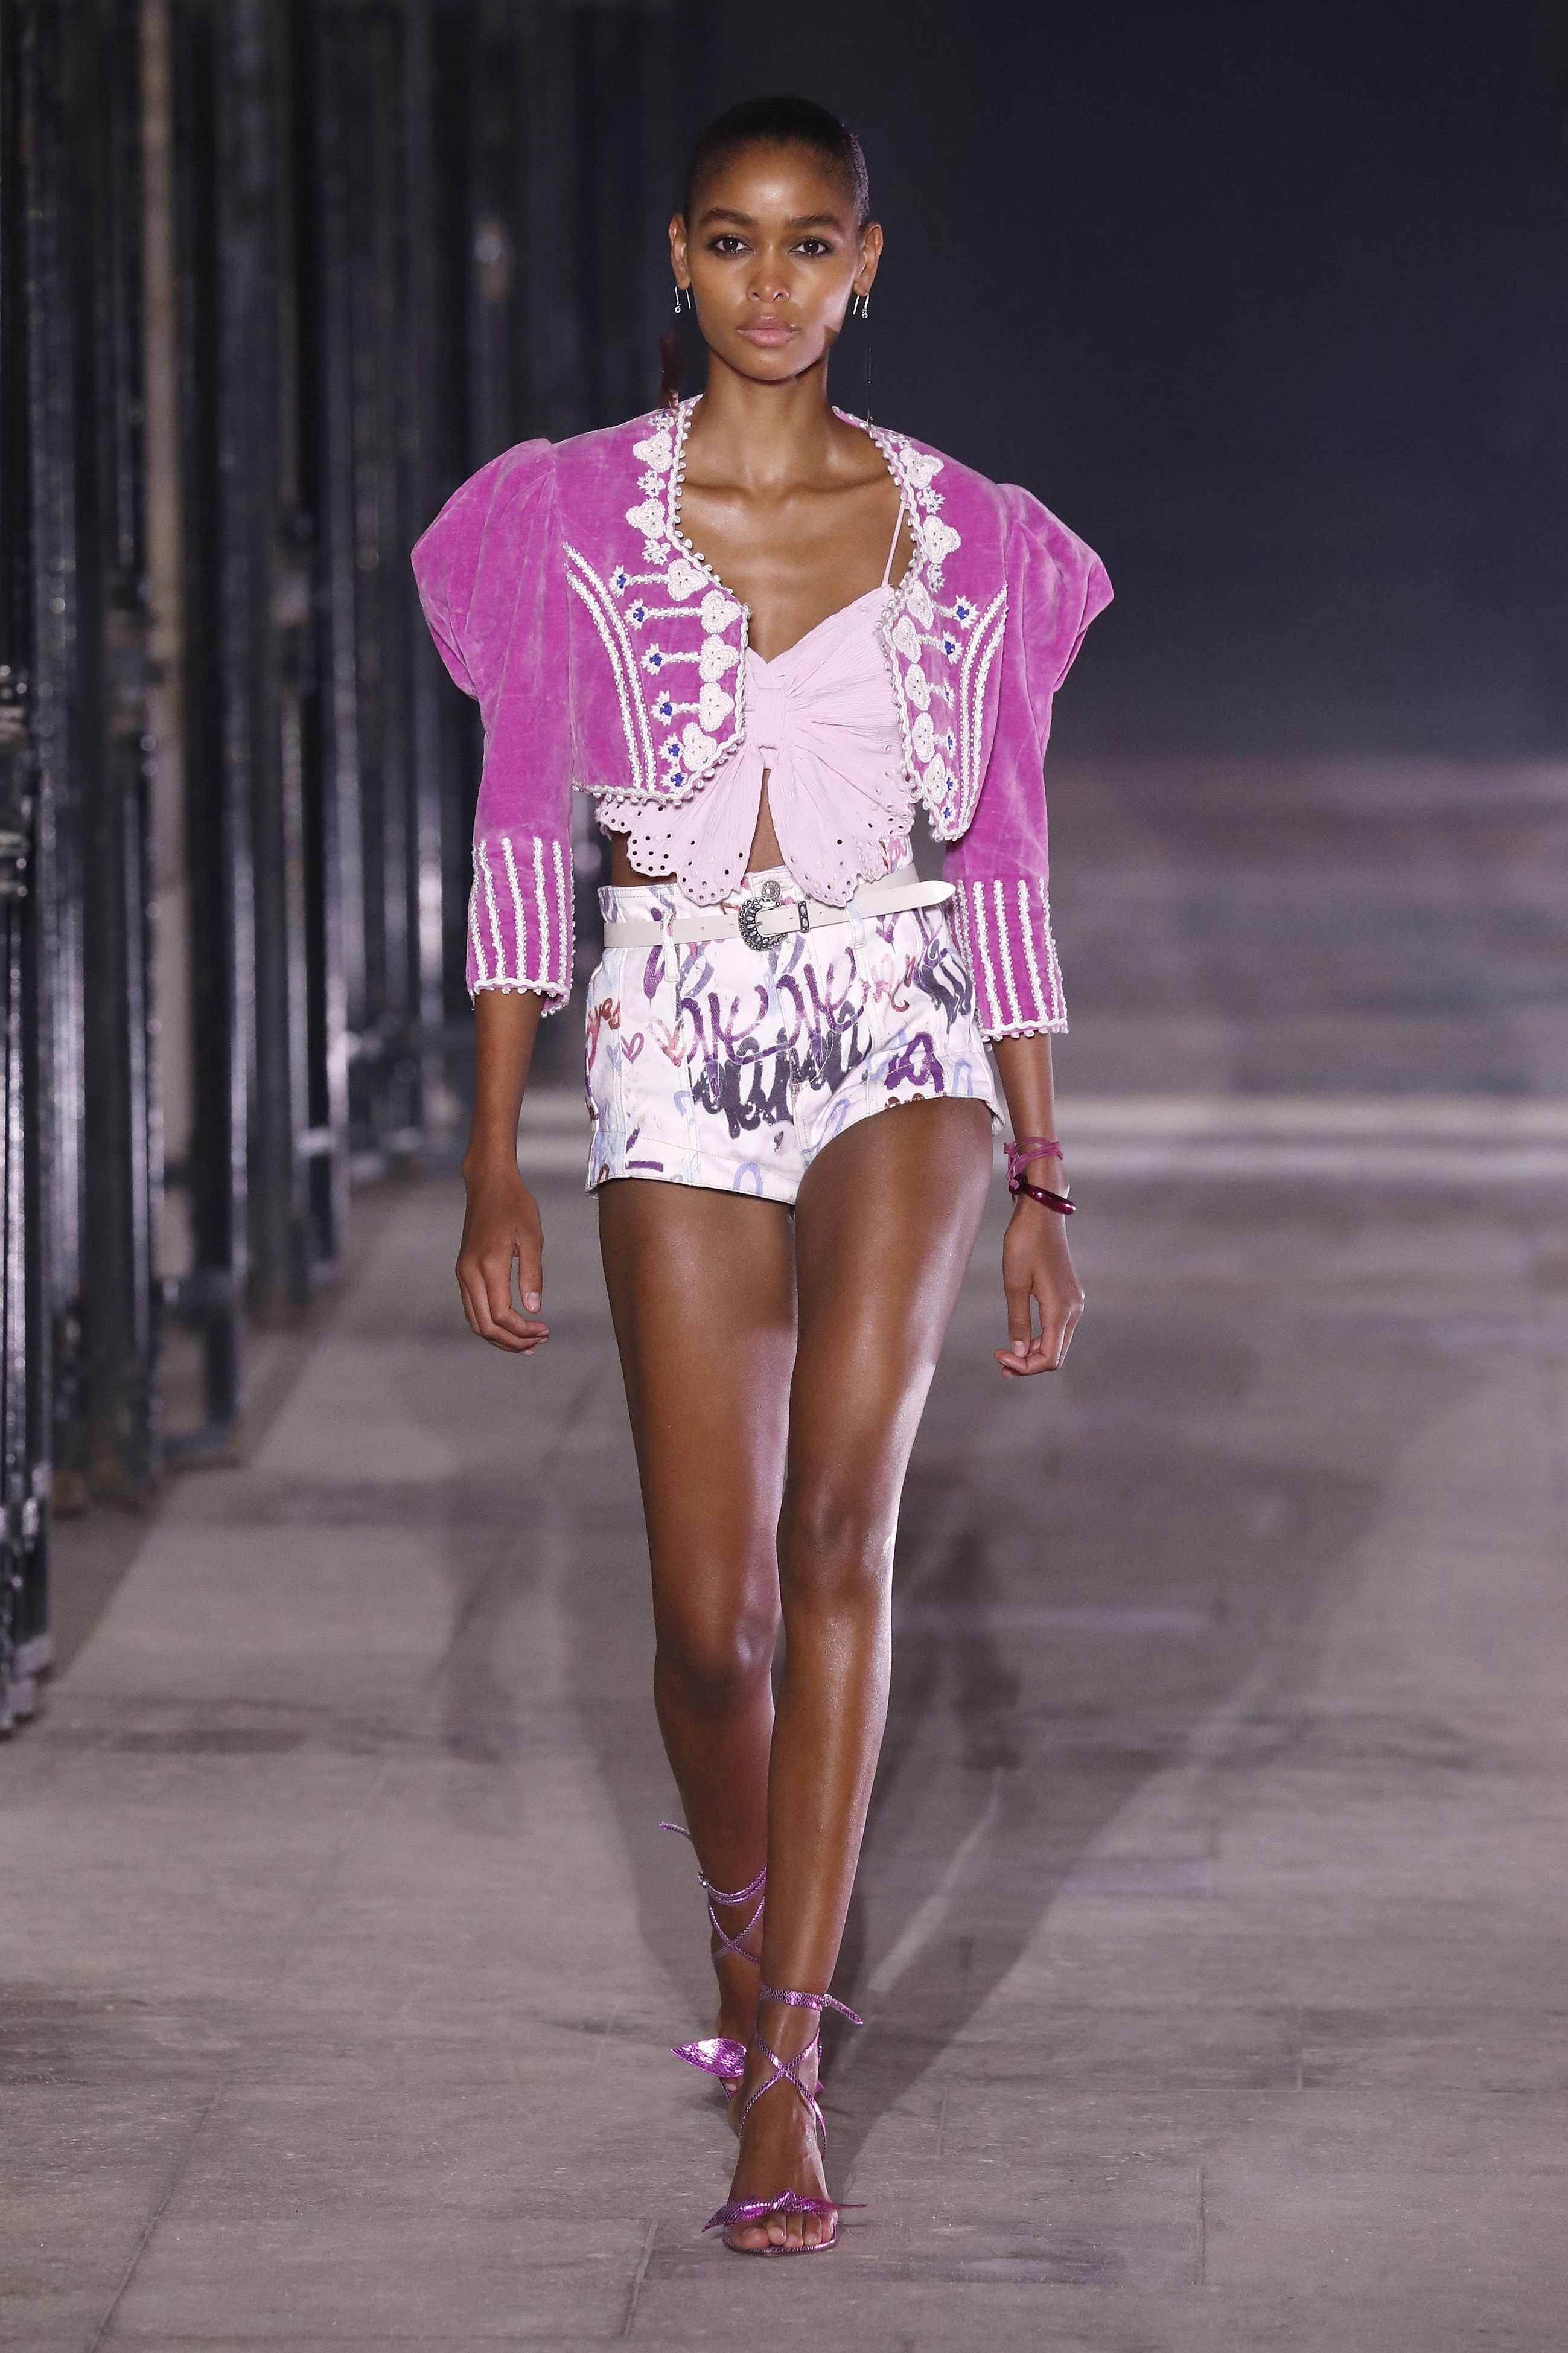 How to Marant's Spring-Summer 2022 Show